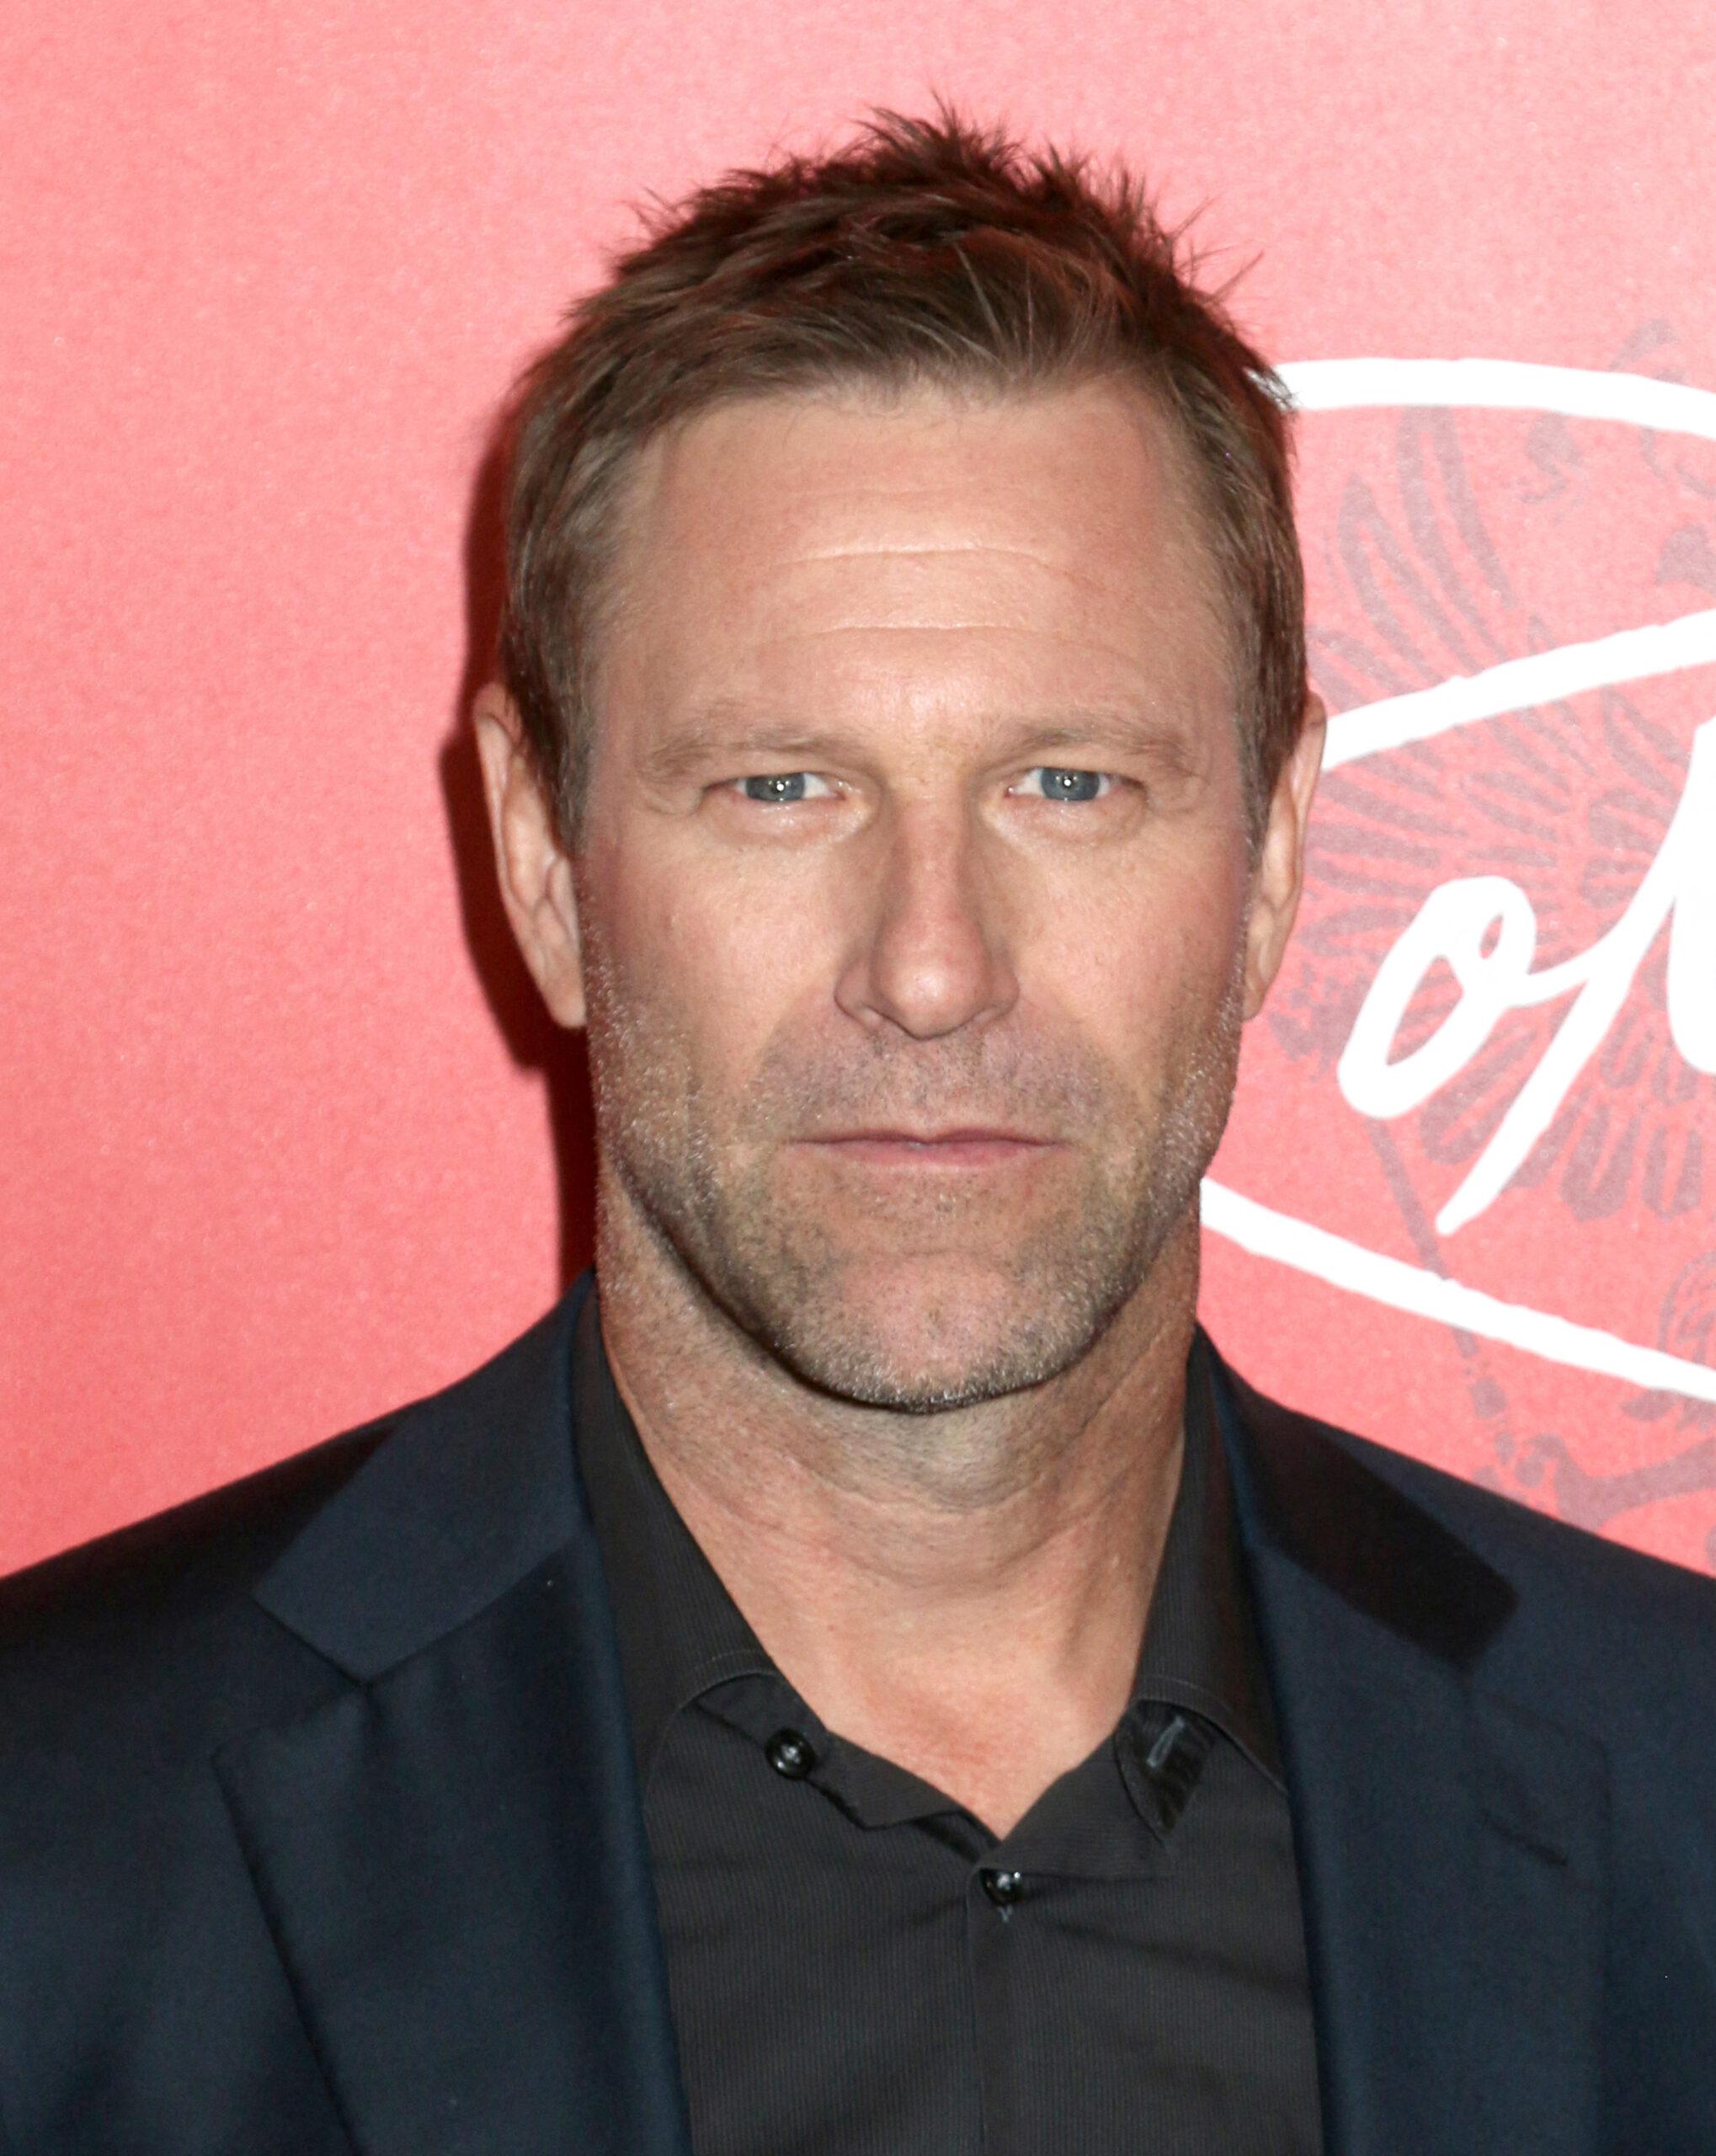 Abigail Breslin Accuses Aaron Eckhart Of 'Aggressive, Demeaning' Behavior On Set Of 'Classified'